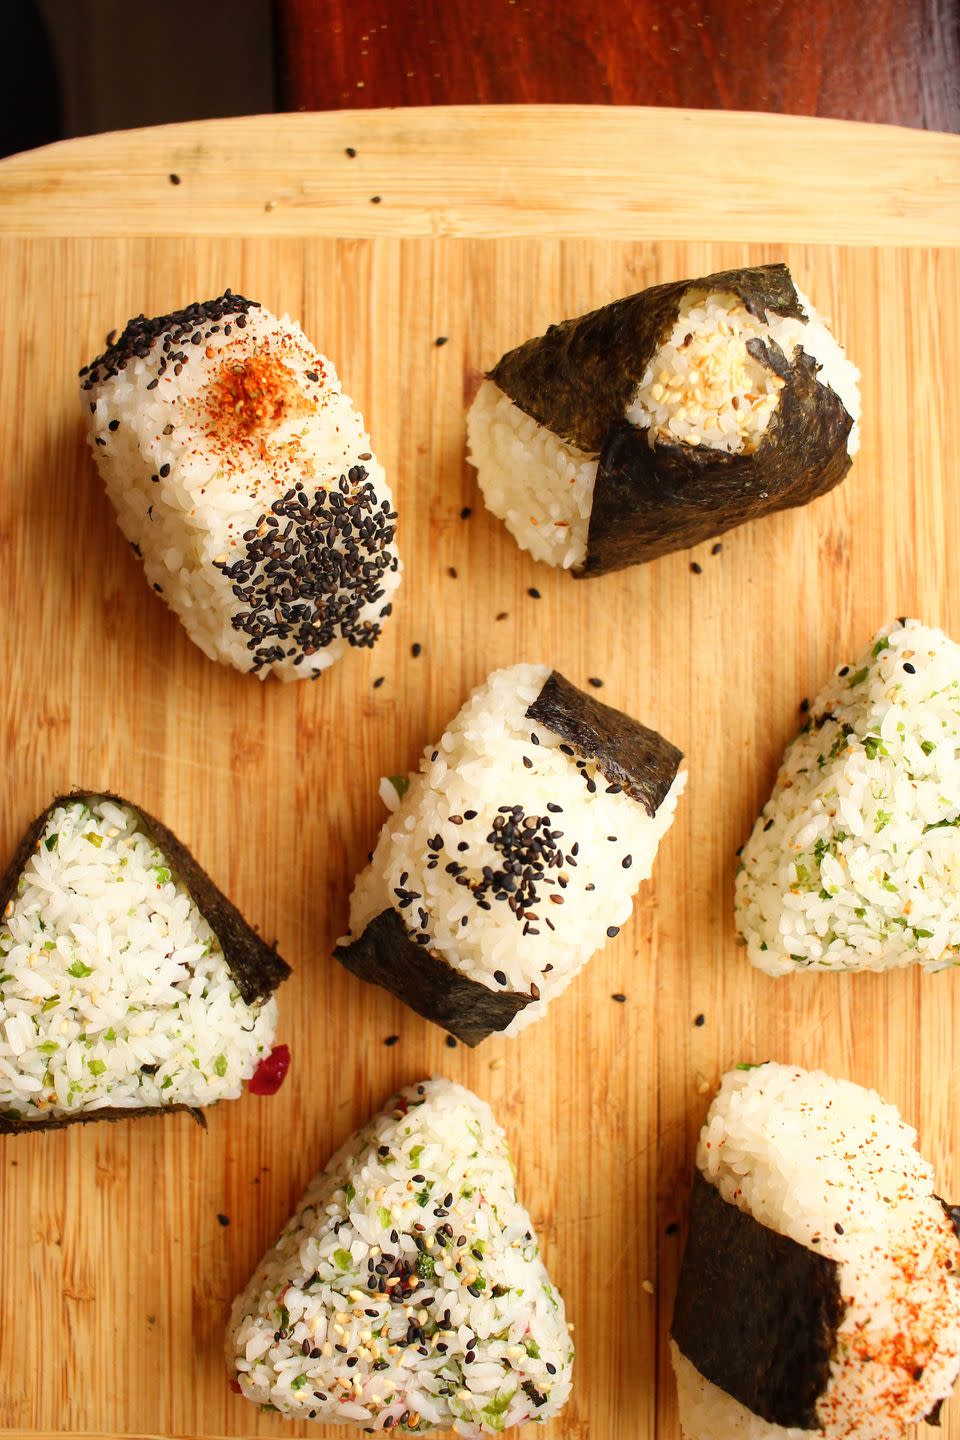 <p>If you're a <a href="https://www.delish.com/cooking/recipe-ideas/g40785924/sushi-recipes/" rel="nofollow noopener" target="_blank" data-ylk="slk:sushi" class="link ">sushi</a> fan, onigiri is a must-try: a humble rice ball accented by a variety of fillings, wrapped in roasted seaweed (nori), and perfect for snacking or a light meal. Onigiri is open to customization and experimentation too—try one of our filling options, or create your own.</p><p>Get the <strong><a href="https://www.delish.com/cooking/recipe-ideas/a34195640/onigiri-recipe/" rel="nofollow noopener" target="_blank" data-ylk="slk:Onigiri (Japanese Rice Balls) recipe" class="link ">Onigiri (Japanese Rice Balls) recipe</a></strong>.</p>